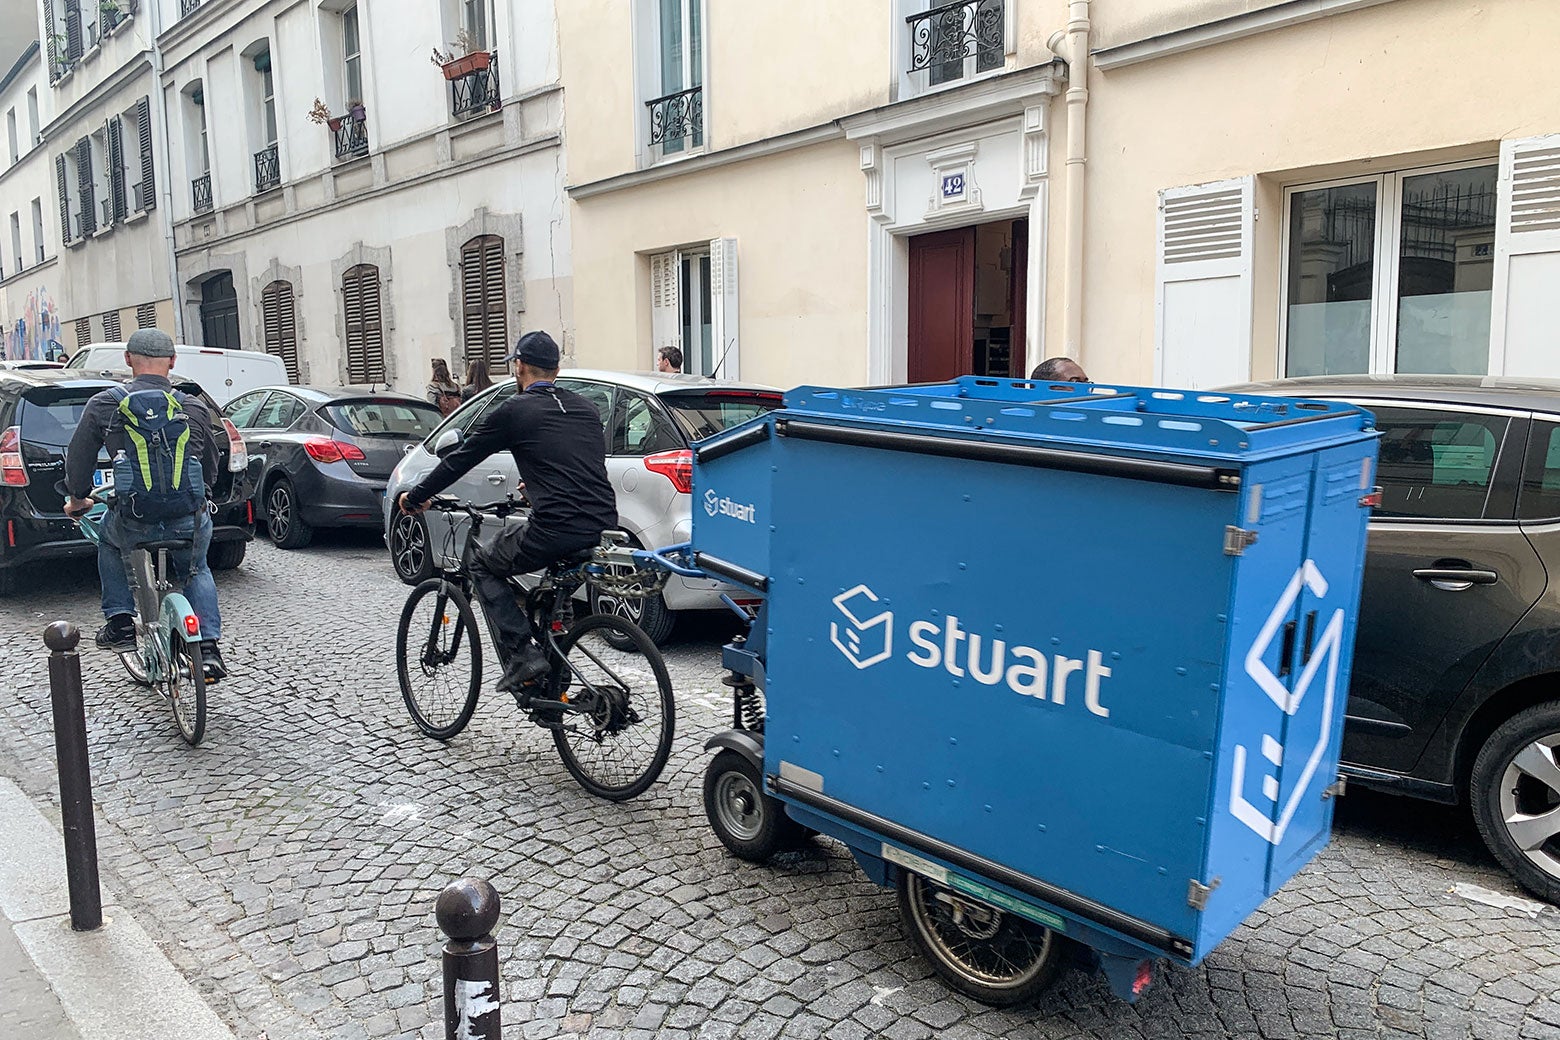 A delivery worker for Paris delivery company Stuart bikes down a cobblestone street with a small blue trailer in tow.